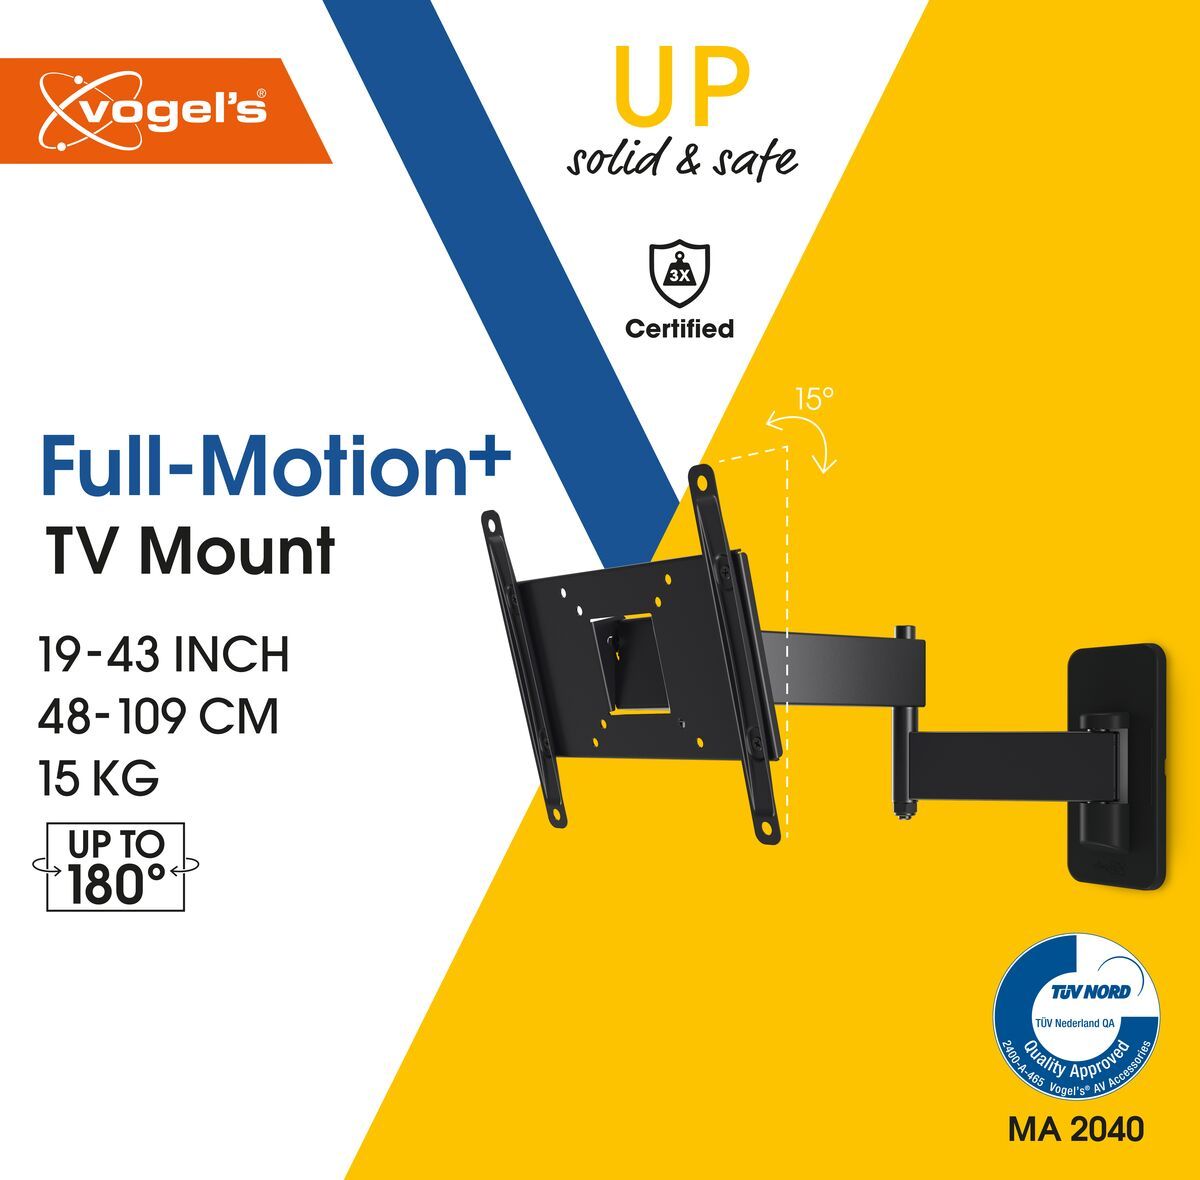 Vogel's MA2040 Full-Motion TV Wall Mount - Suitable for 19 up to 43 inch TVs - Full motion (up to 180°) - Tilt up to 10° - Packaging front